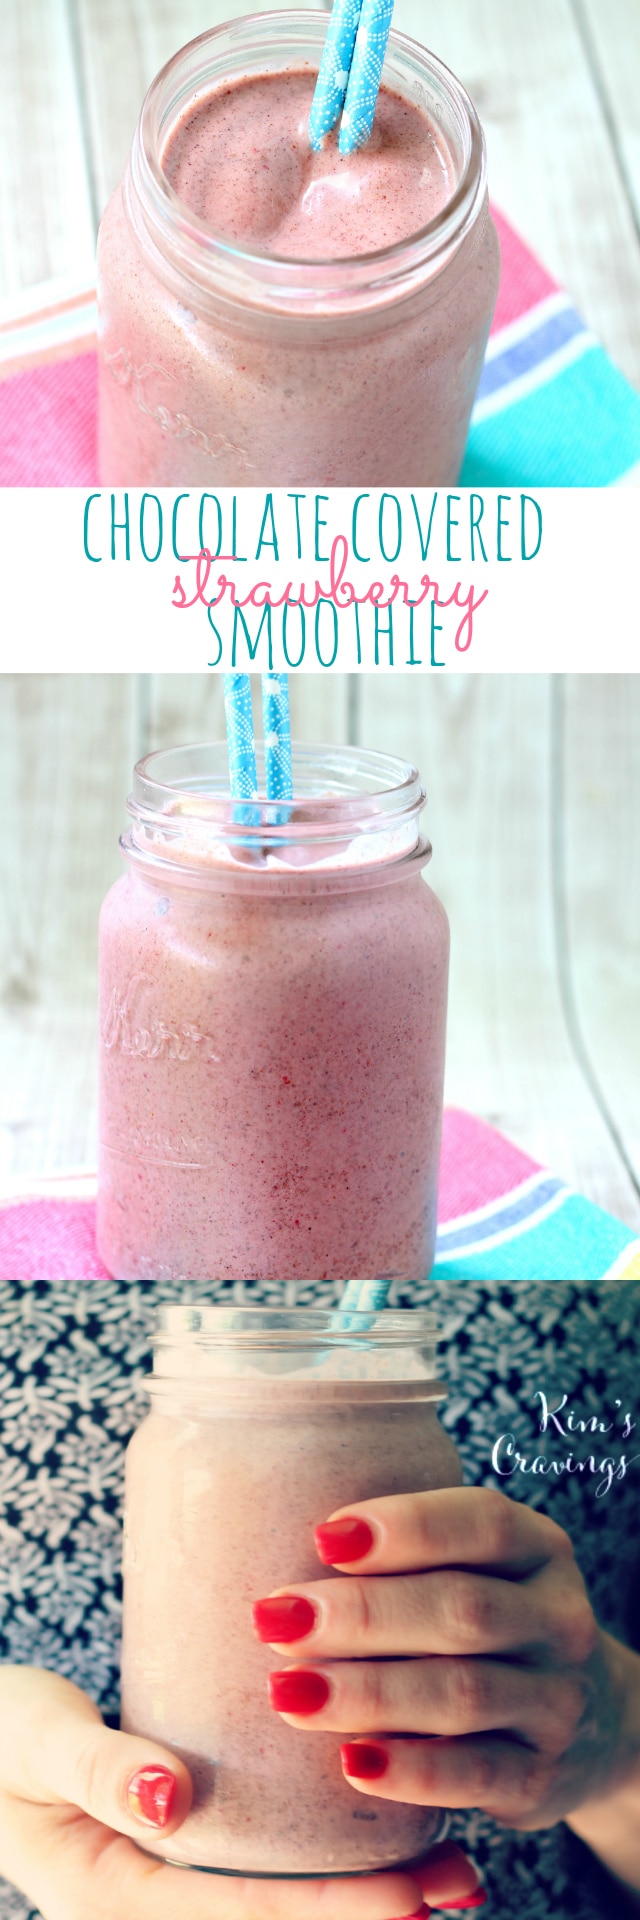 The combination of sweet chocolate and tart strawberries is truly a match made in heaven and these two flavors meet in this simple, yet dazzling chocolate covered strawberry smoothie!